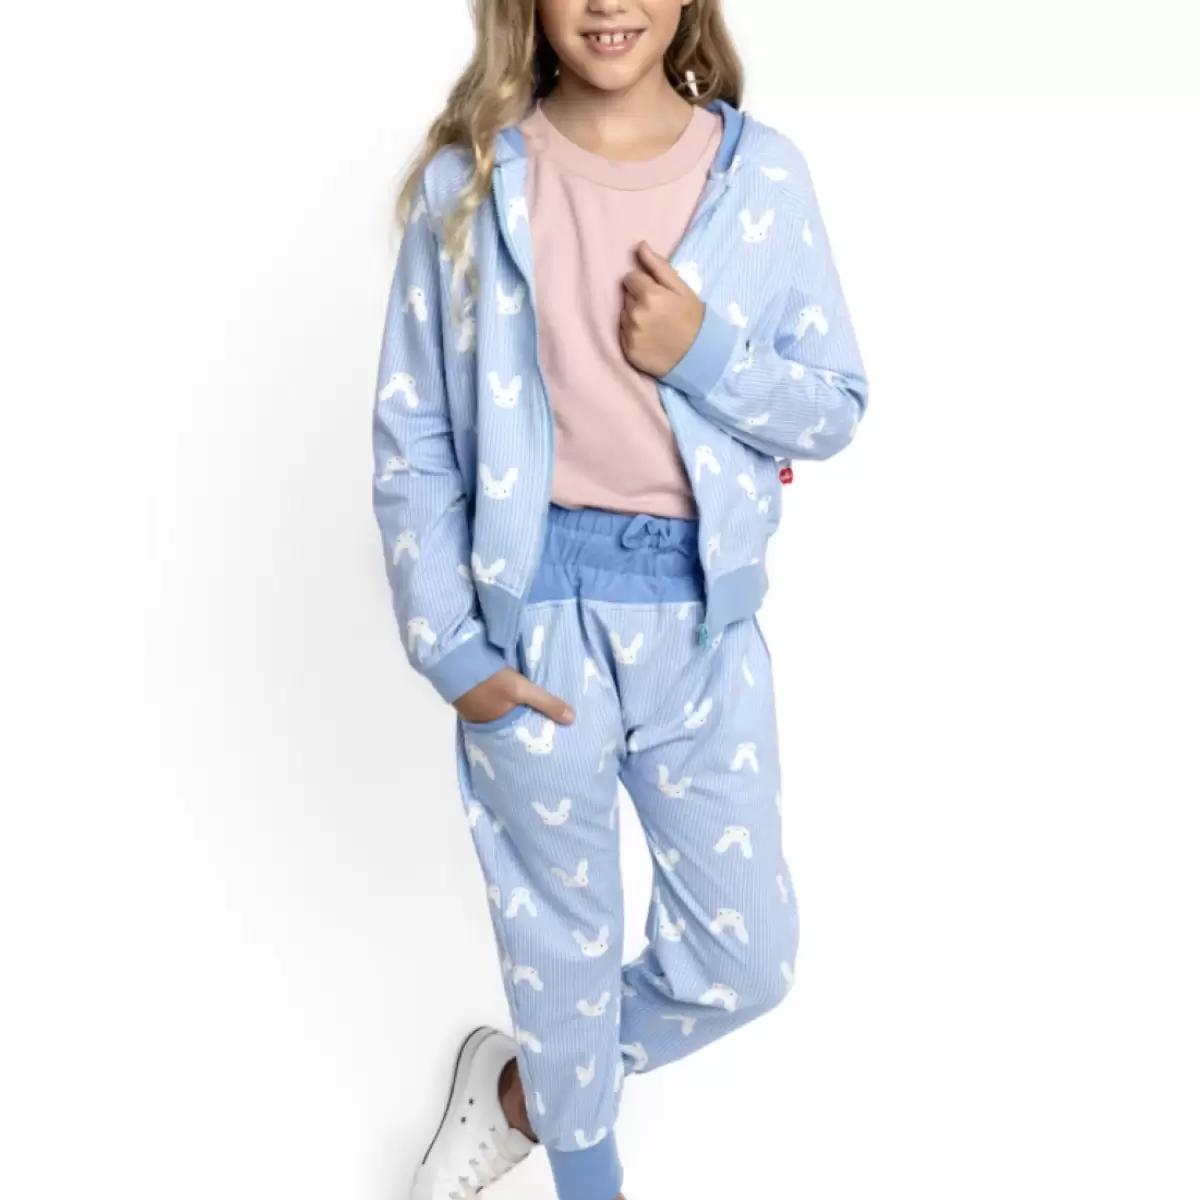 The Ethical Childrens Clothing Brand Thats Perfect For Play 2